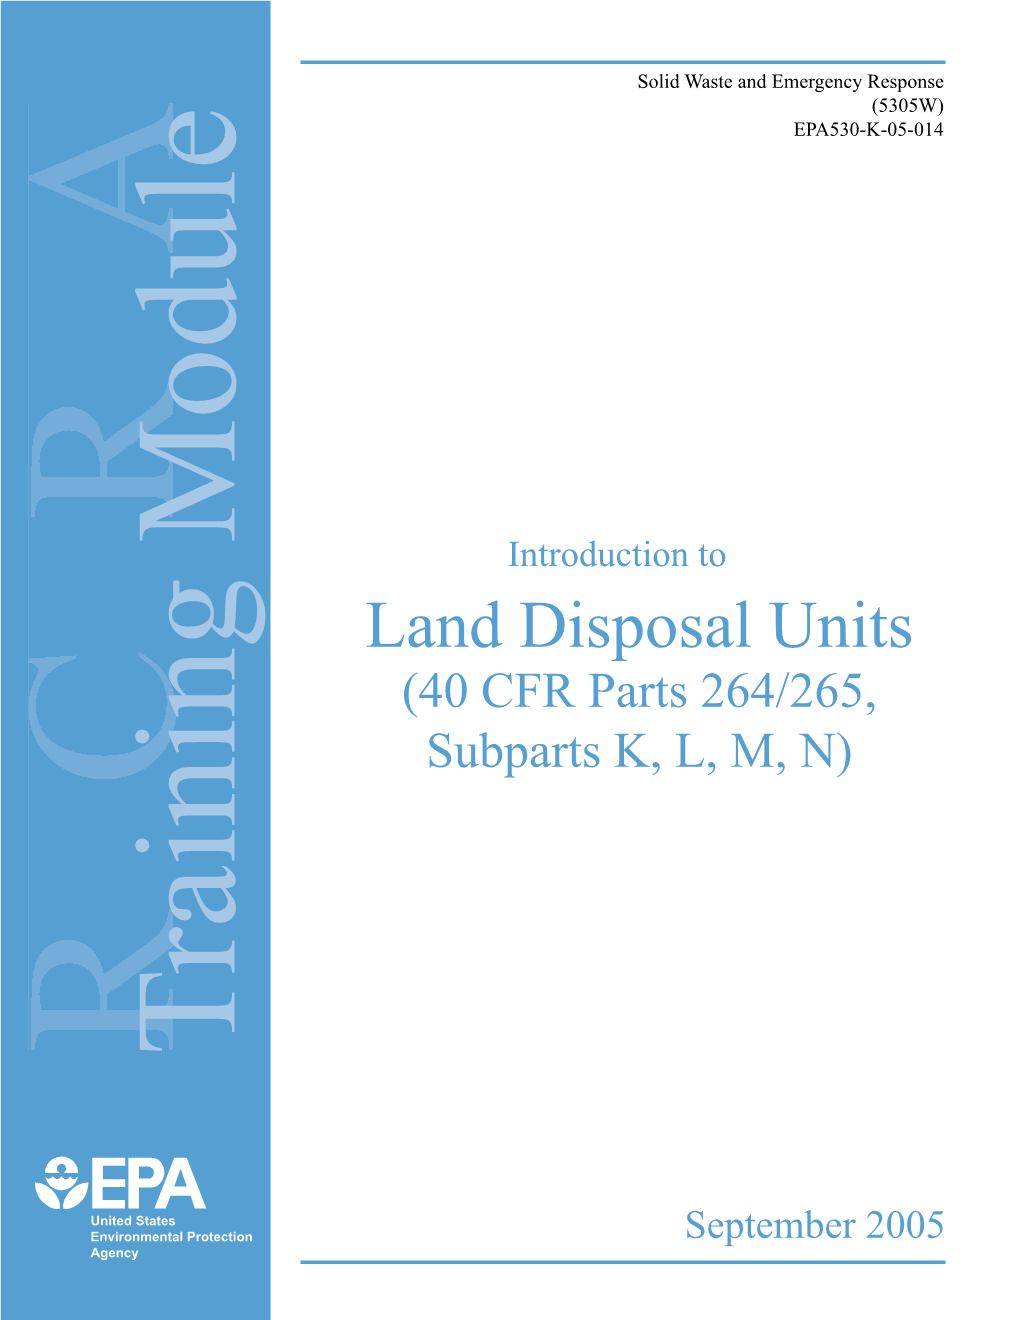 Introduction to Land Disposal Units (40 CFR Parts 264/265, Subparts K, L, M, N) Training Module Training